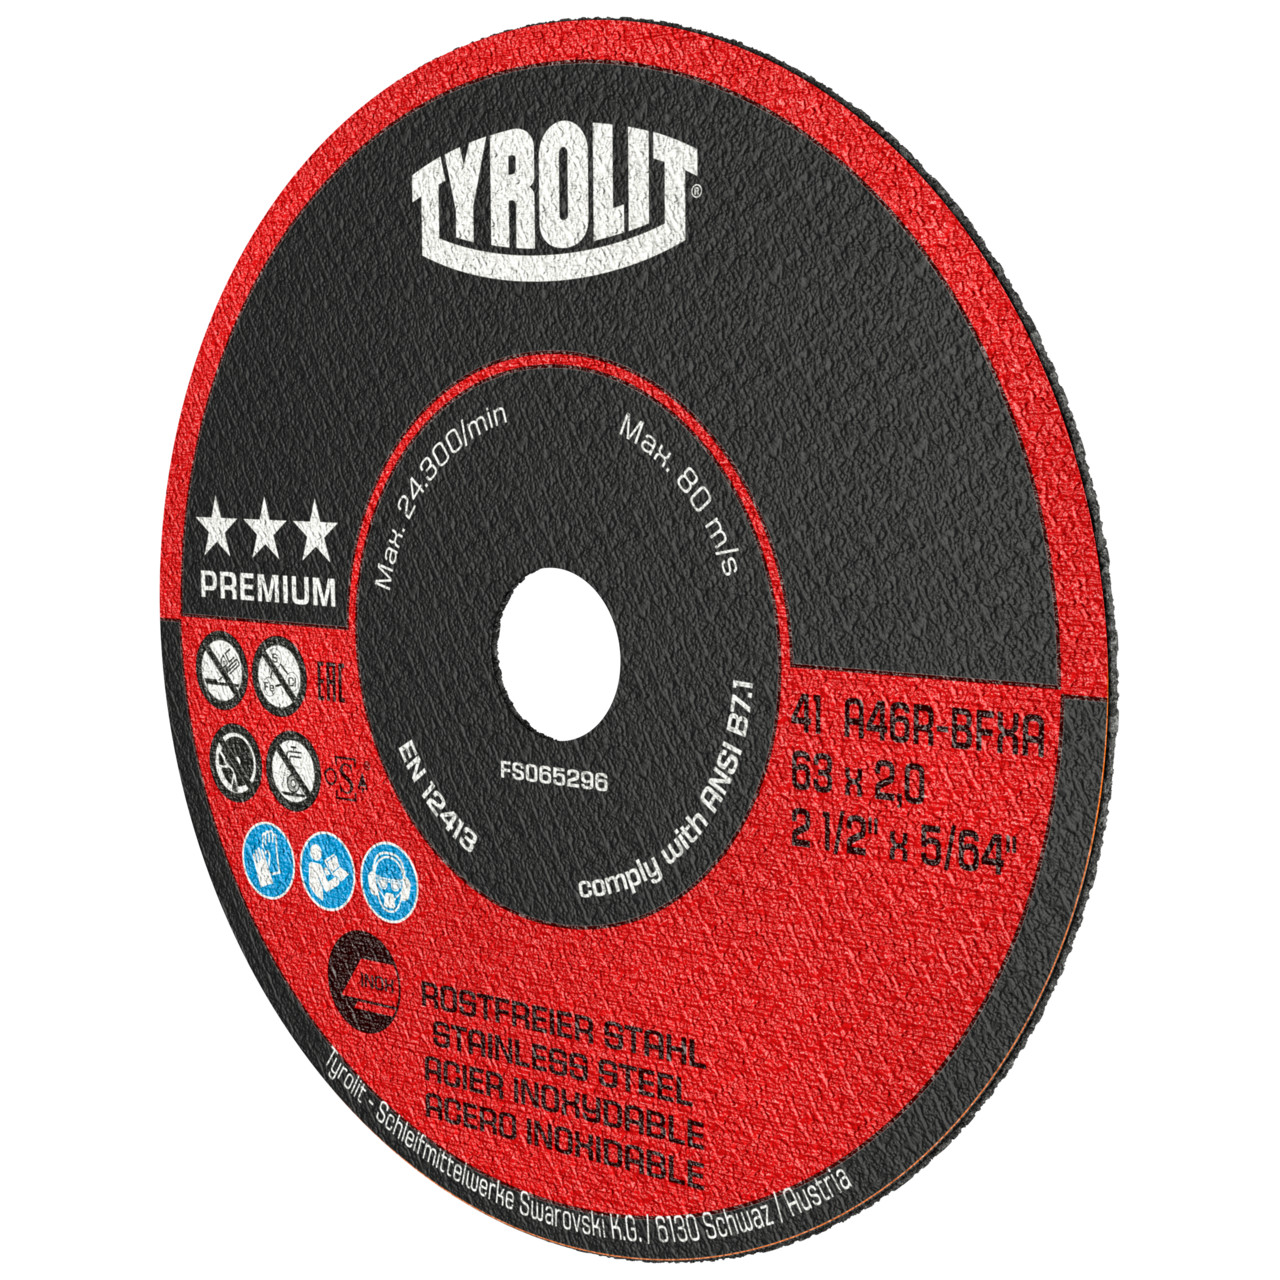 Tyrolit Cutting discs DxDxH 75x1.6x10 For stainless steel, shape: 41 - straight version, Art. 325222